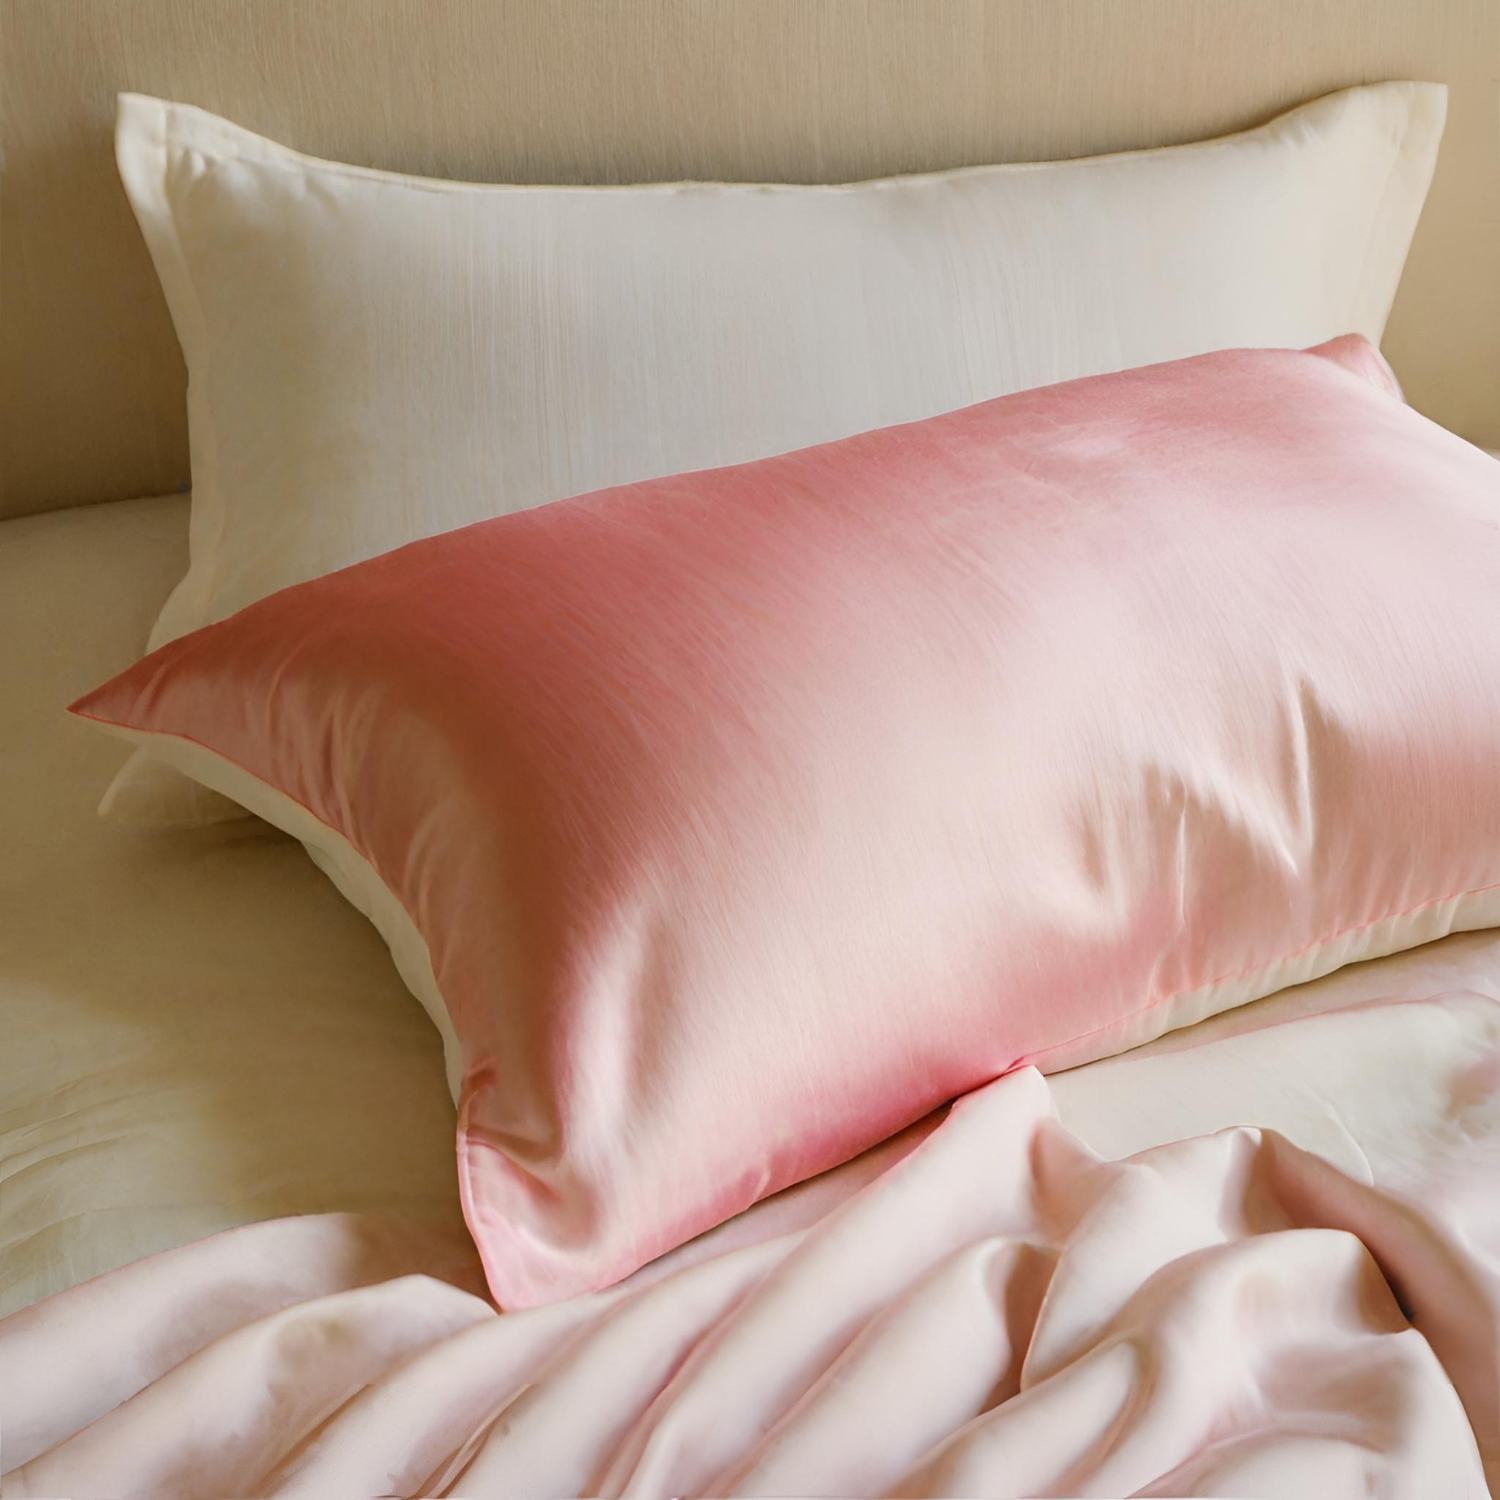 Silk Pillowcases That Can Help Prevent Facial Wrinkles While You Sleep